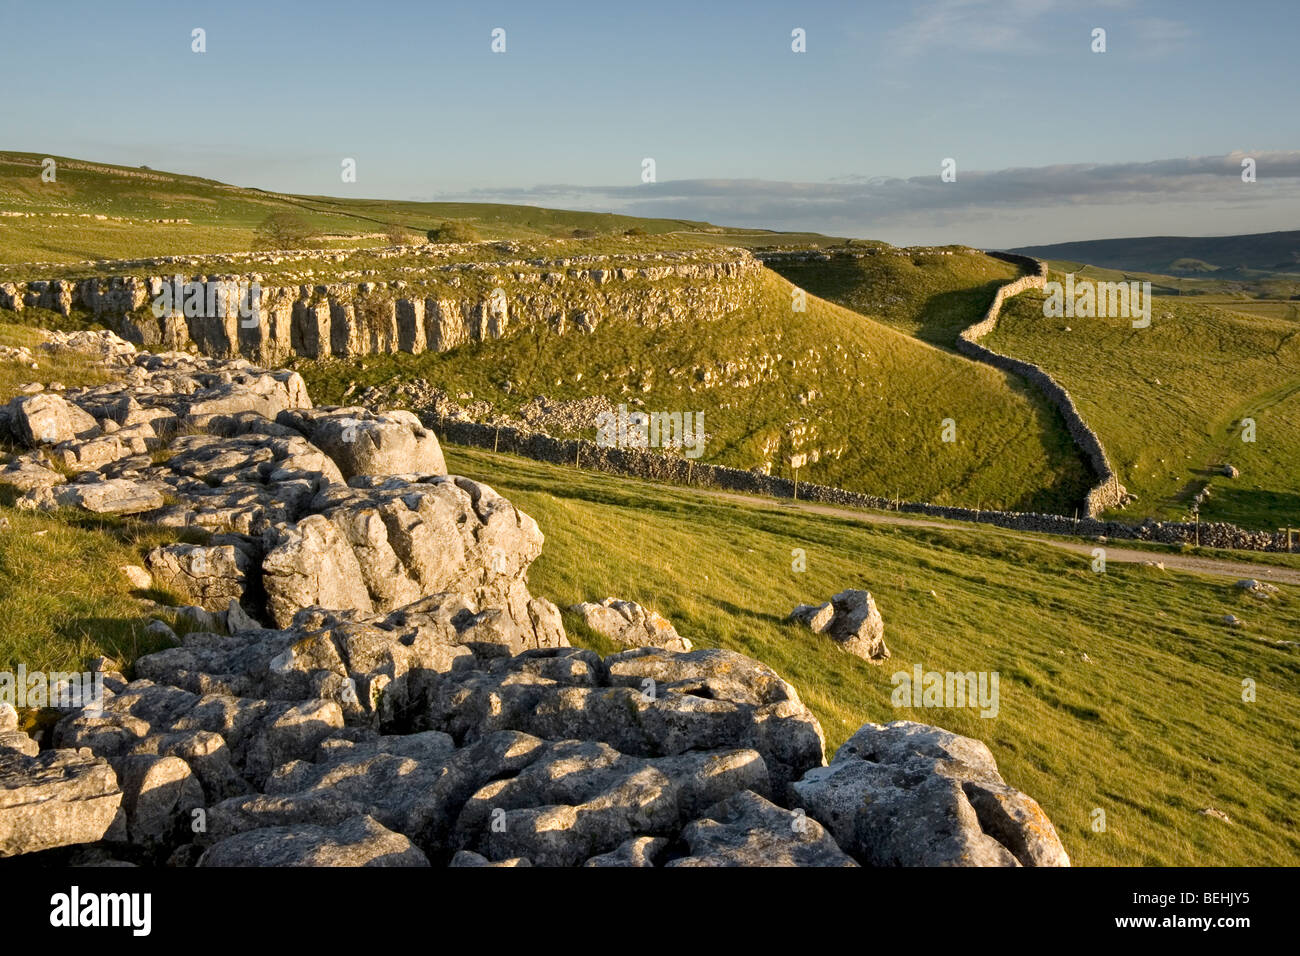 Limestone pavement near Conistone, Upper Wharfedale, in the Yorkshire Dales National Park, England Stock Photo